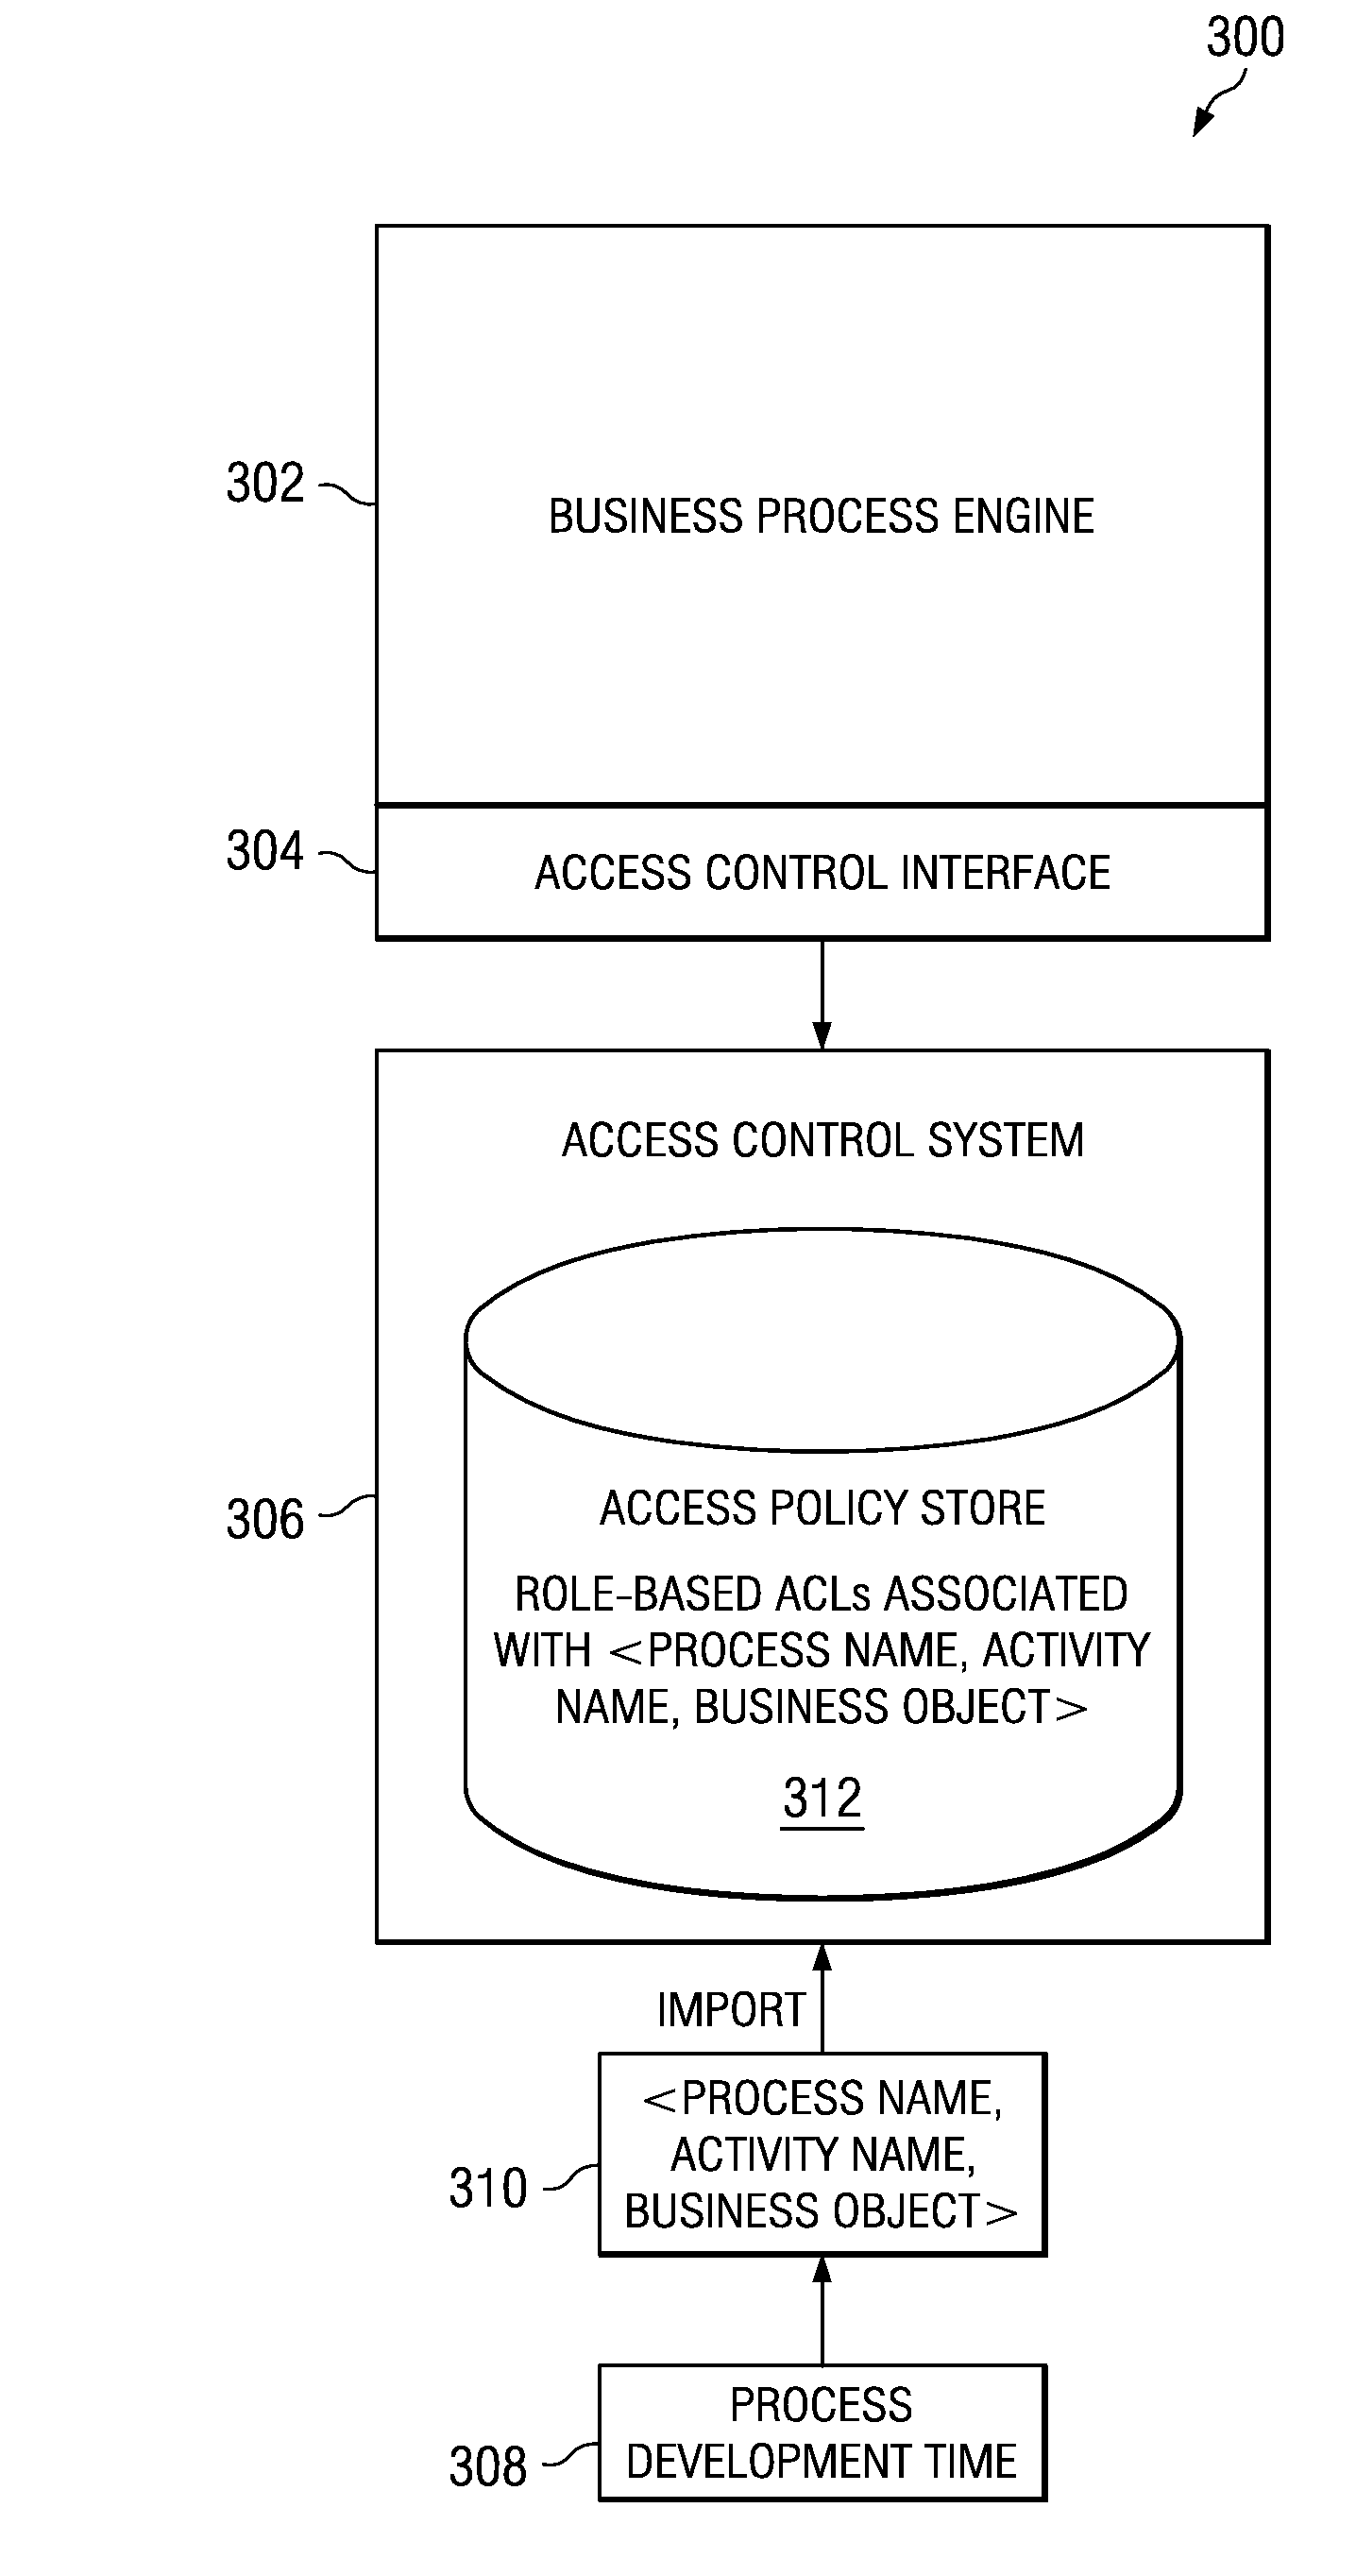 Policy-Based Access Control Approach to Staff Activities of a Business Process